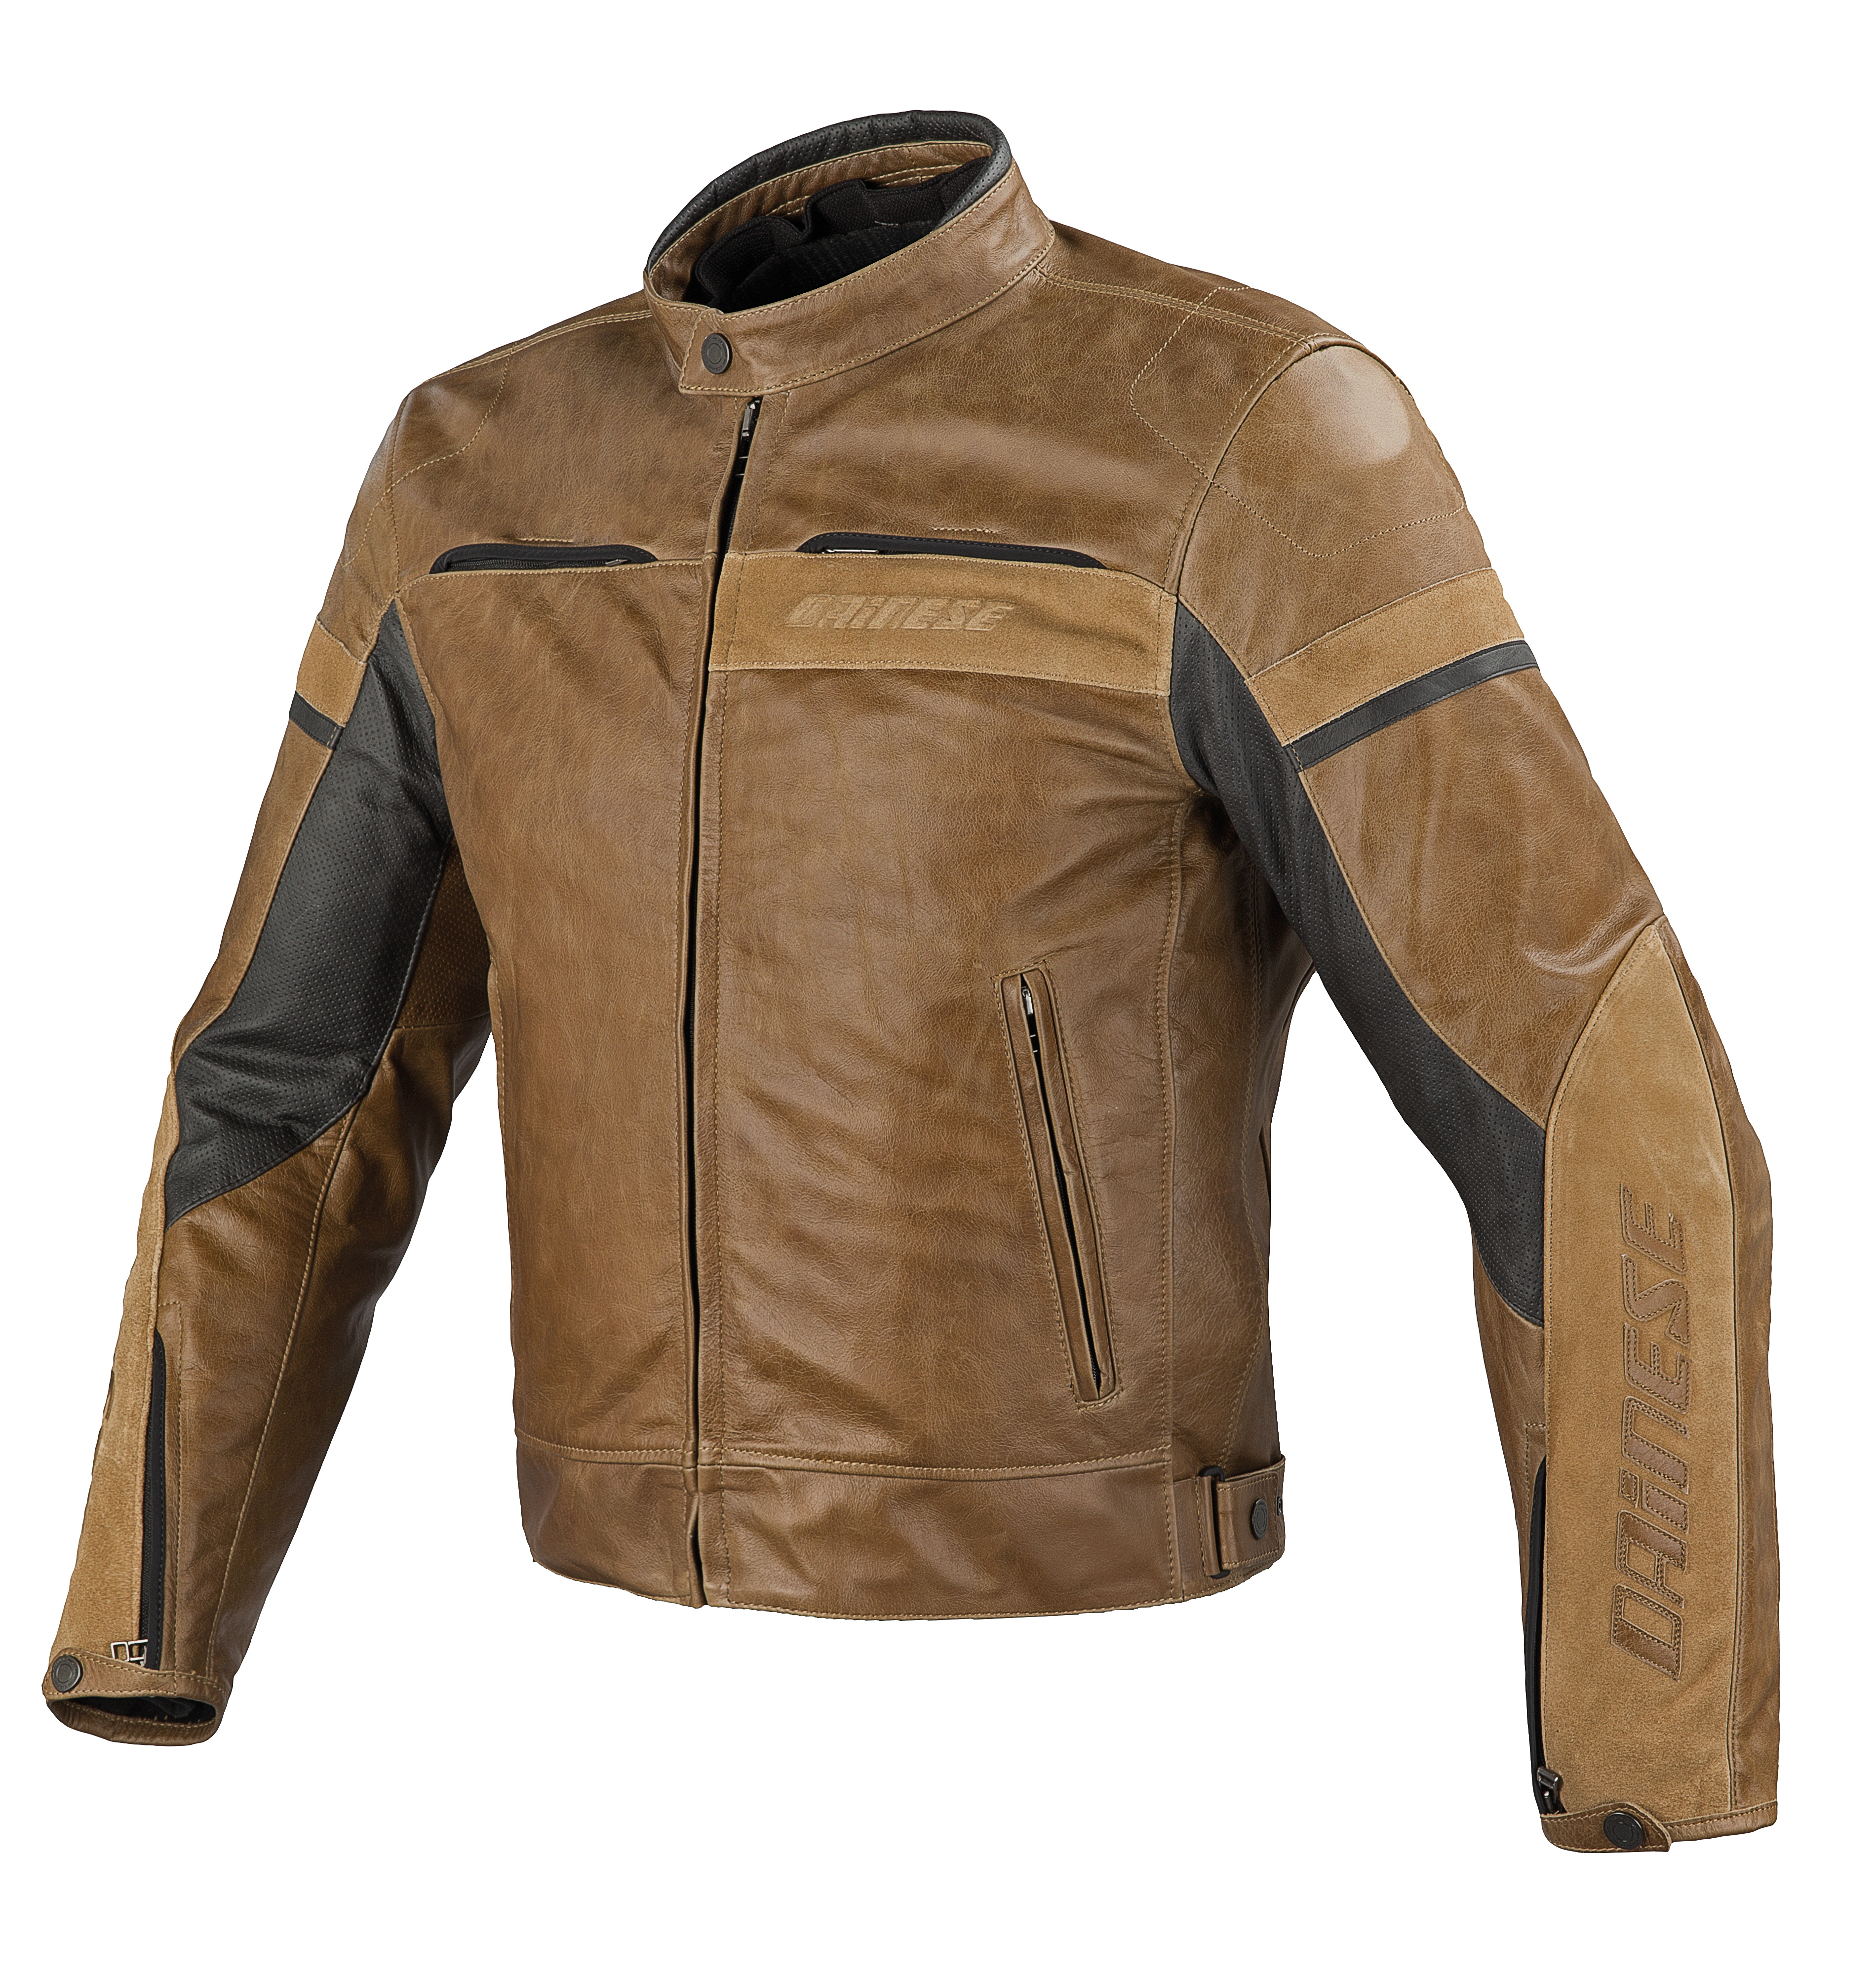 New: Dainese leather jacket 2014 collection